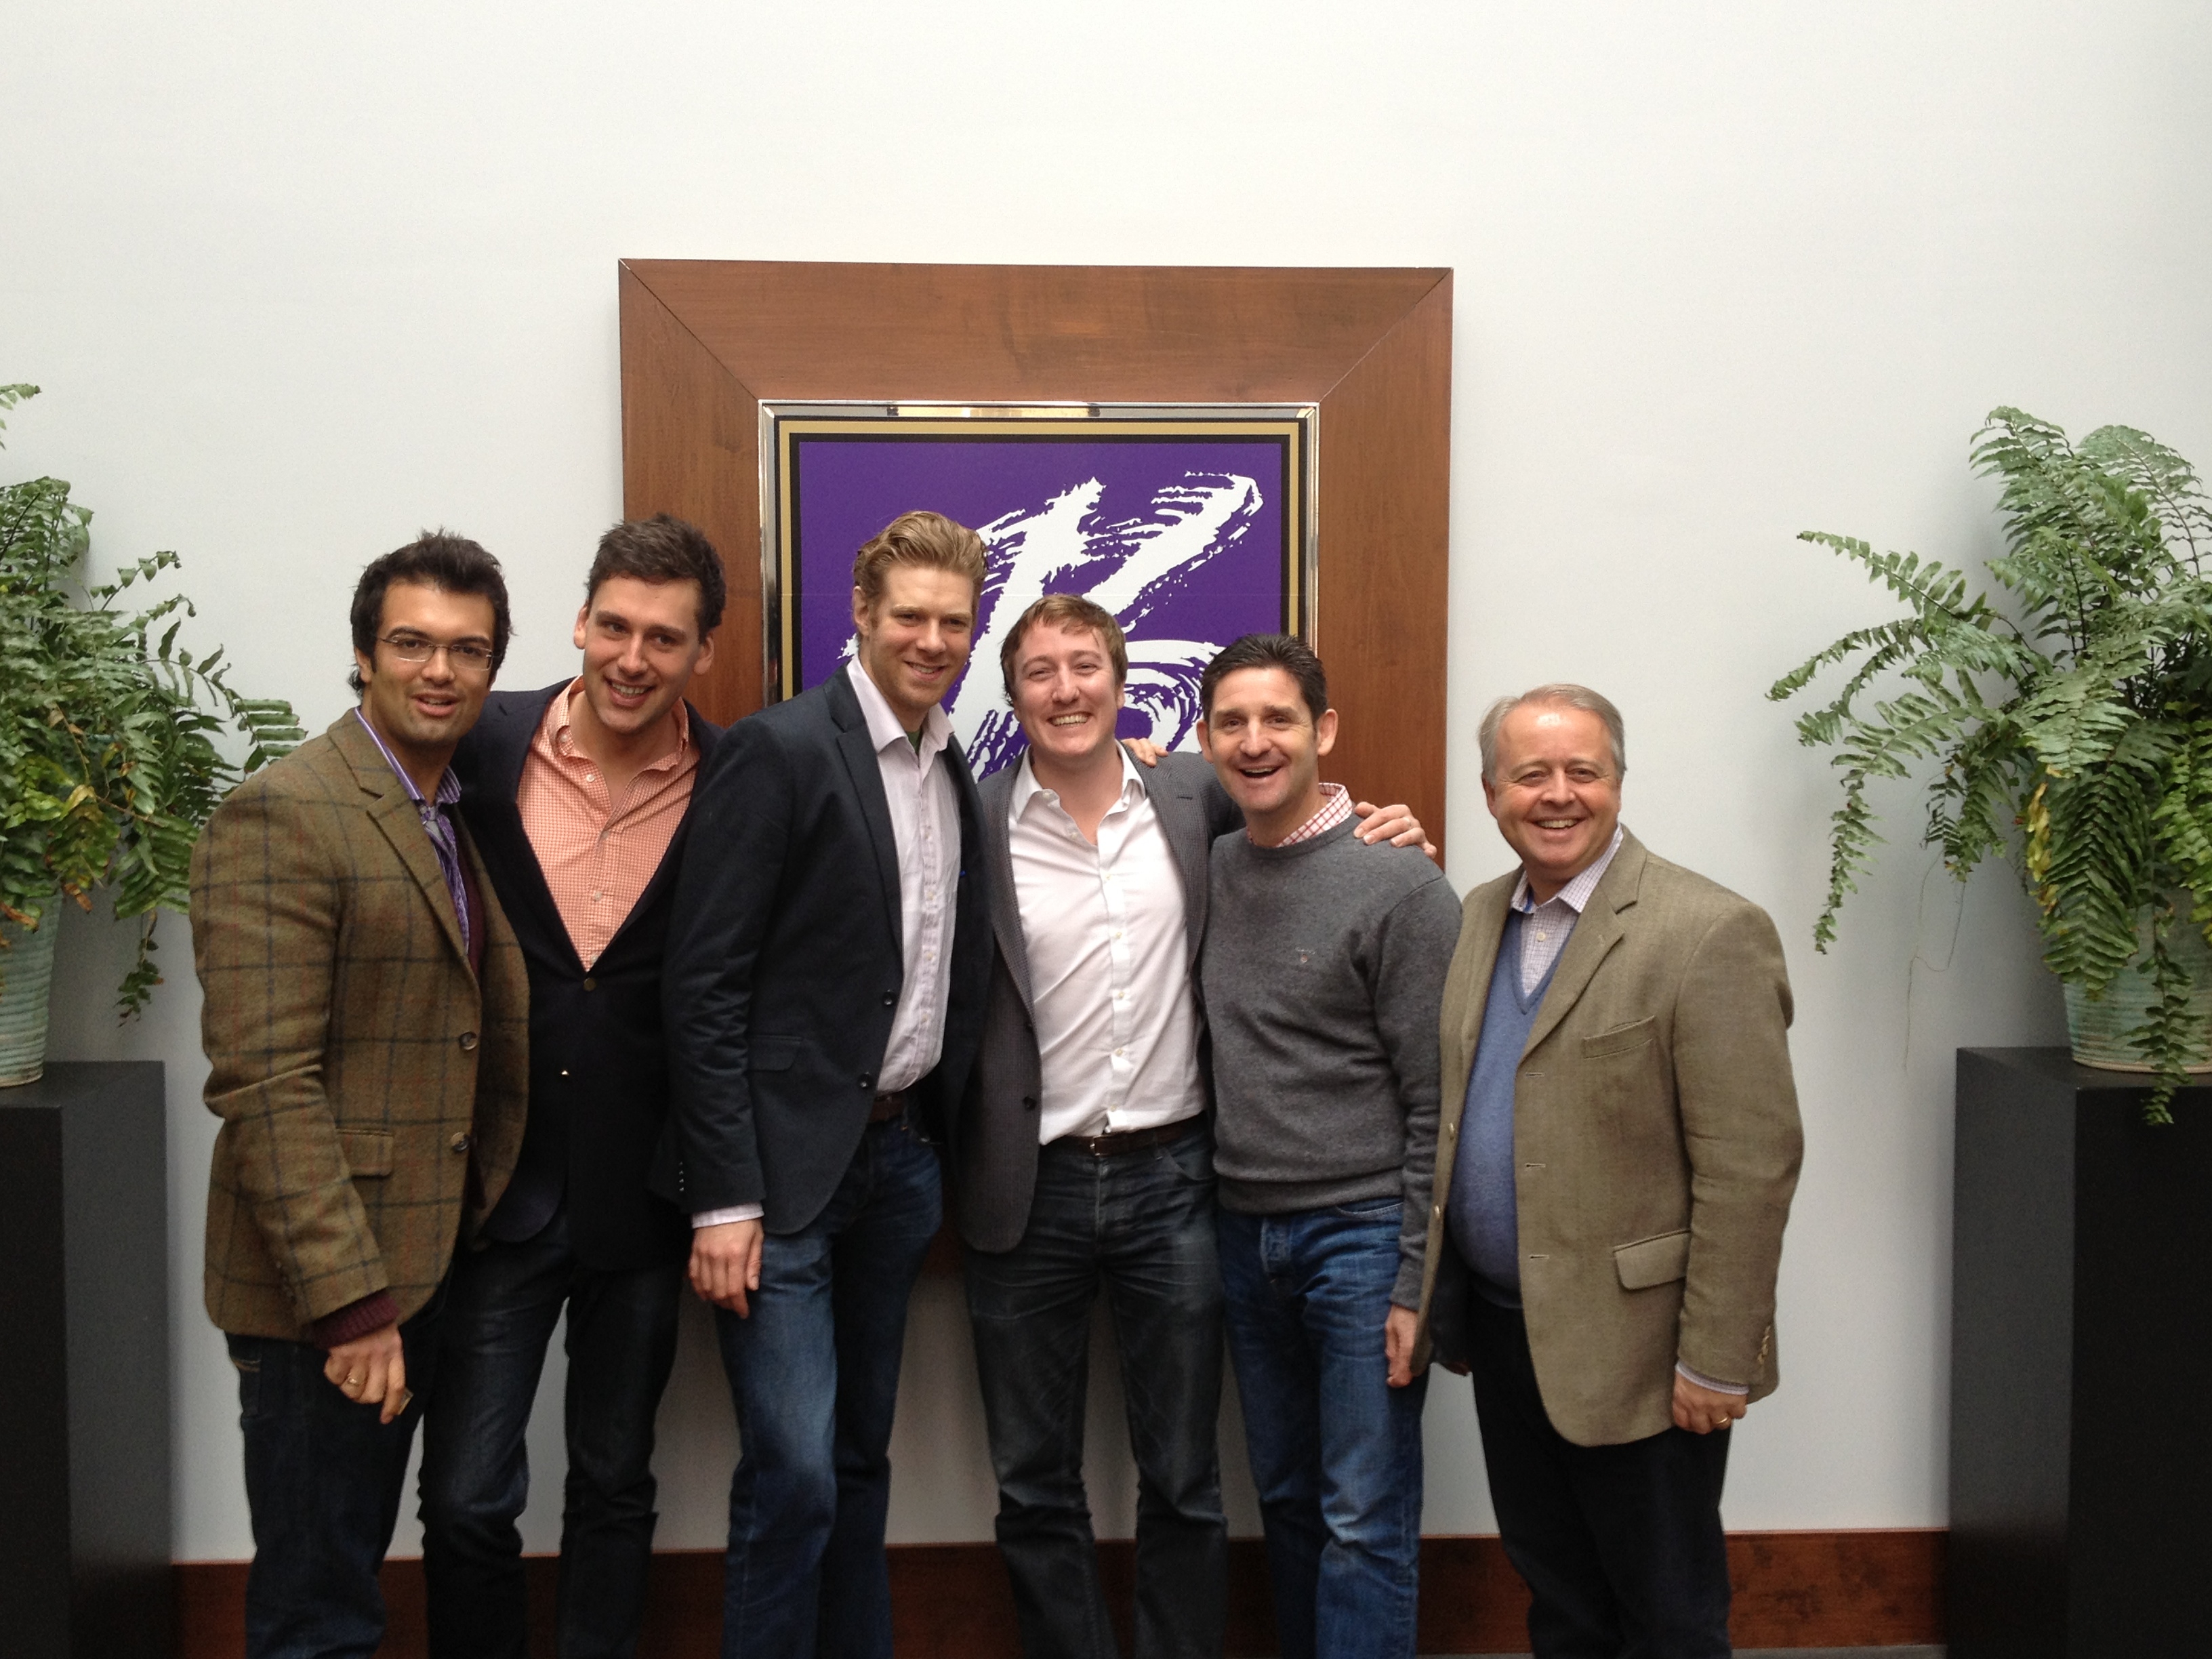 Photos: The King’s Singers pose for a photo in the lobby of the Bologna Center before departing the Delta.